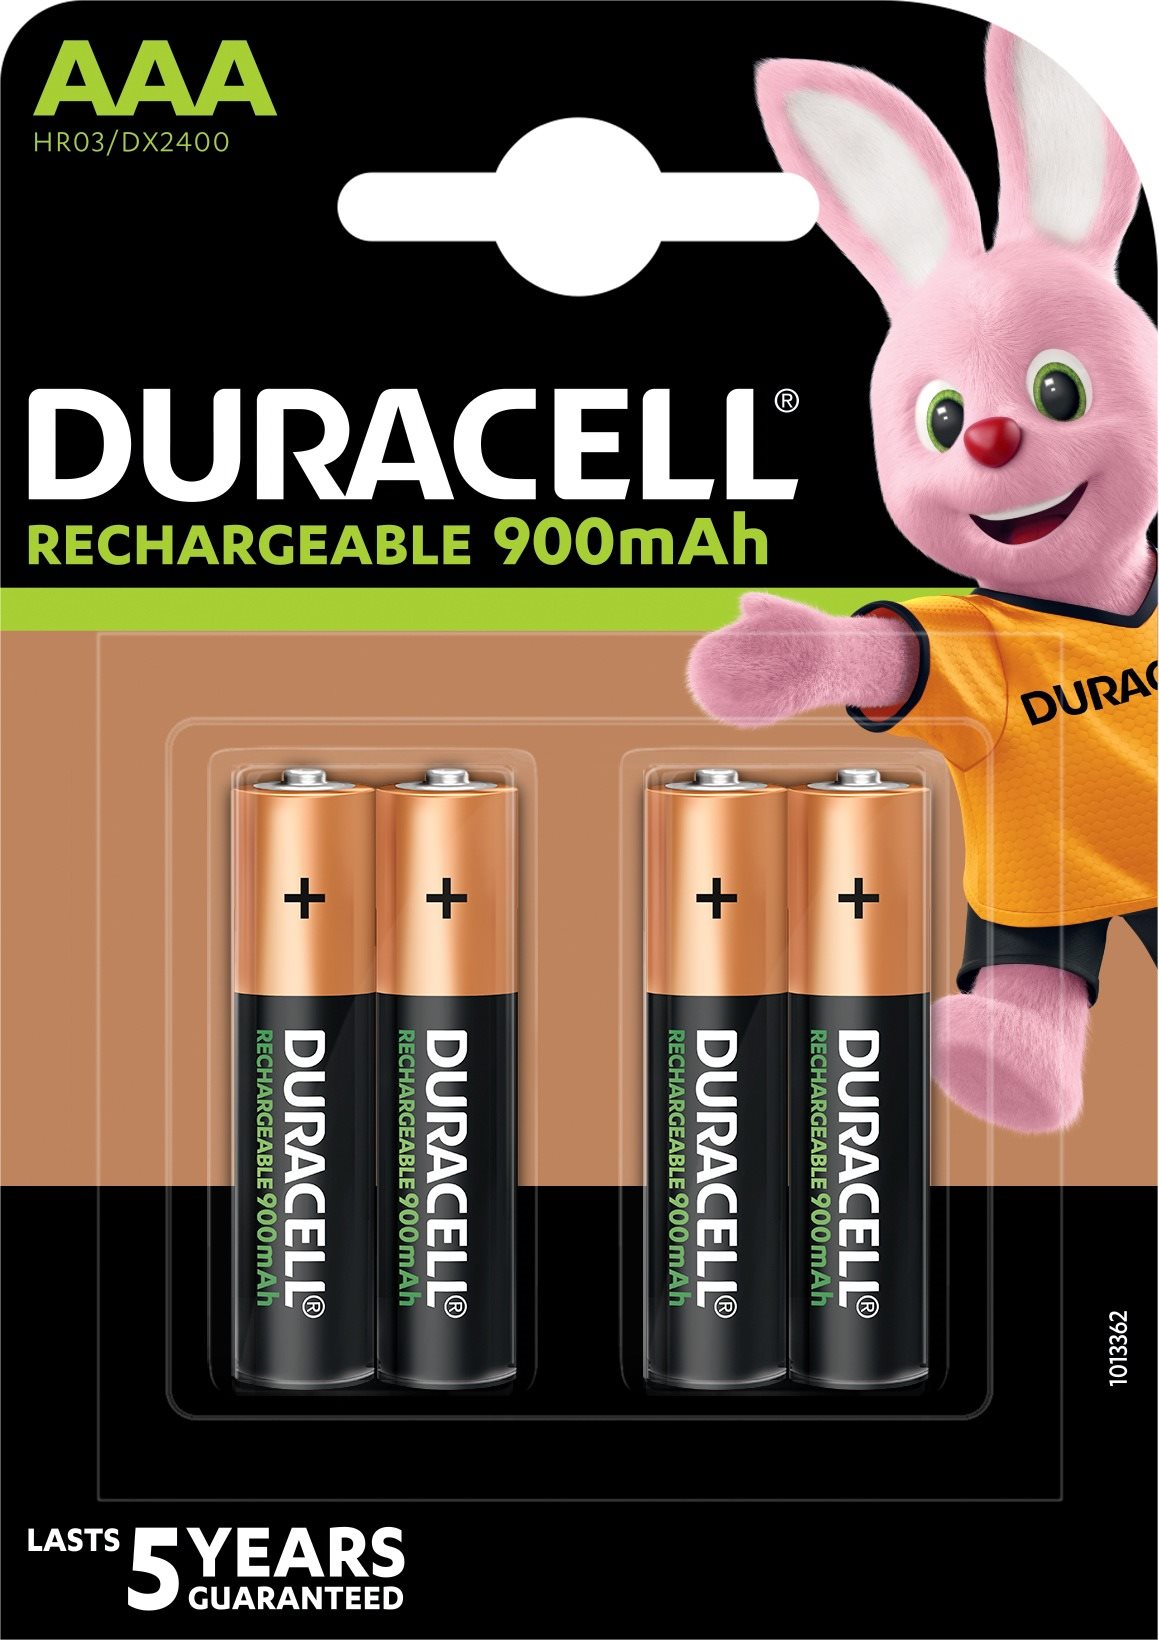 Duracell AAA-4 NiMh Accu (900mAh) STAY CHARGED